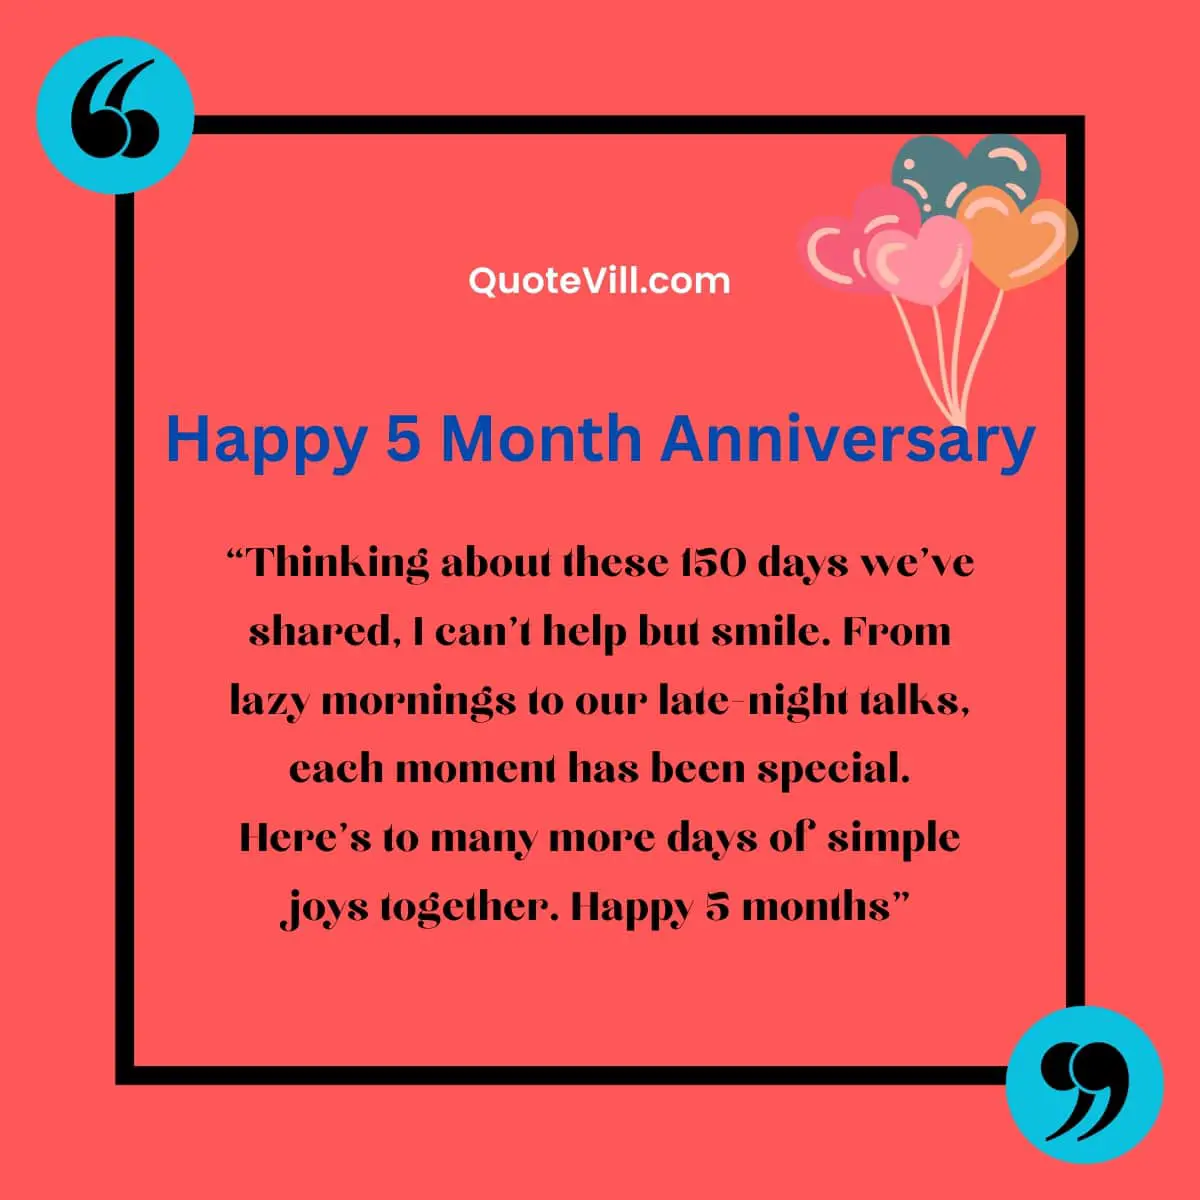 Happy-5-Month-Anniversary-For-Couples